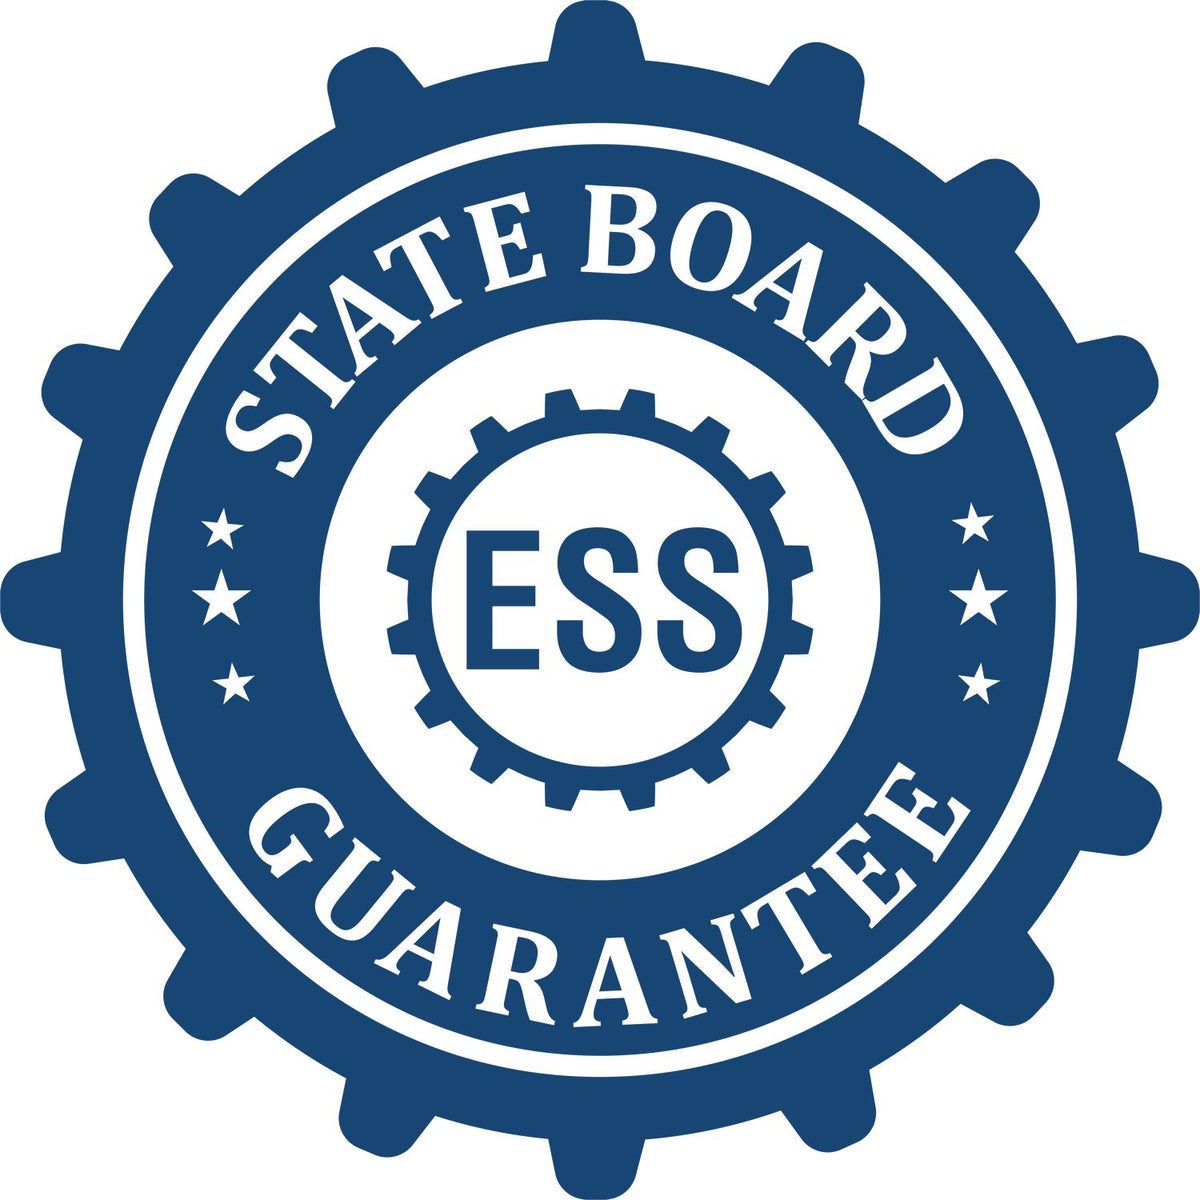 An emblem in a gear shape illustrating a state board guarantee for the Hybrid Pennsylvania Geologist Seal